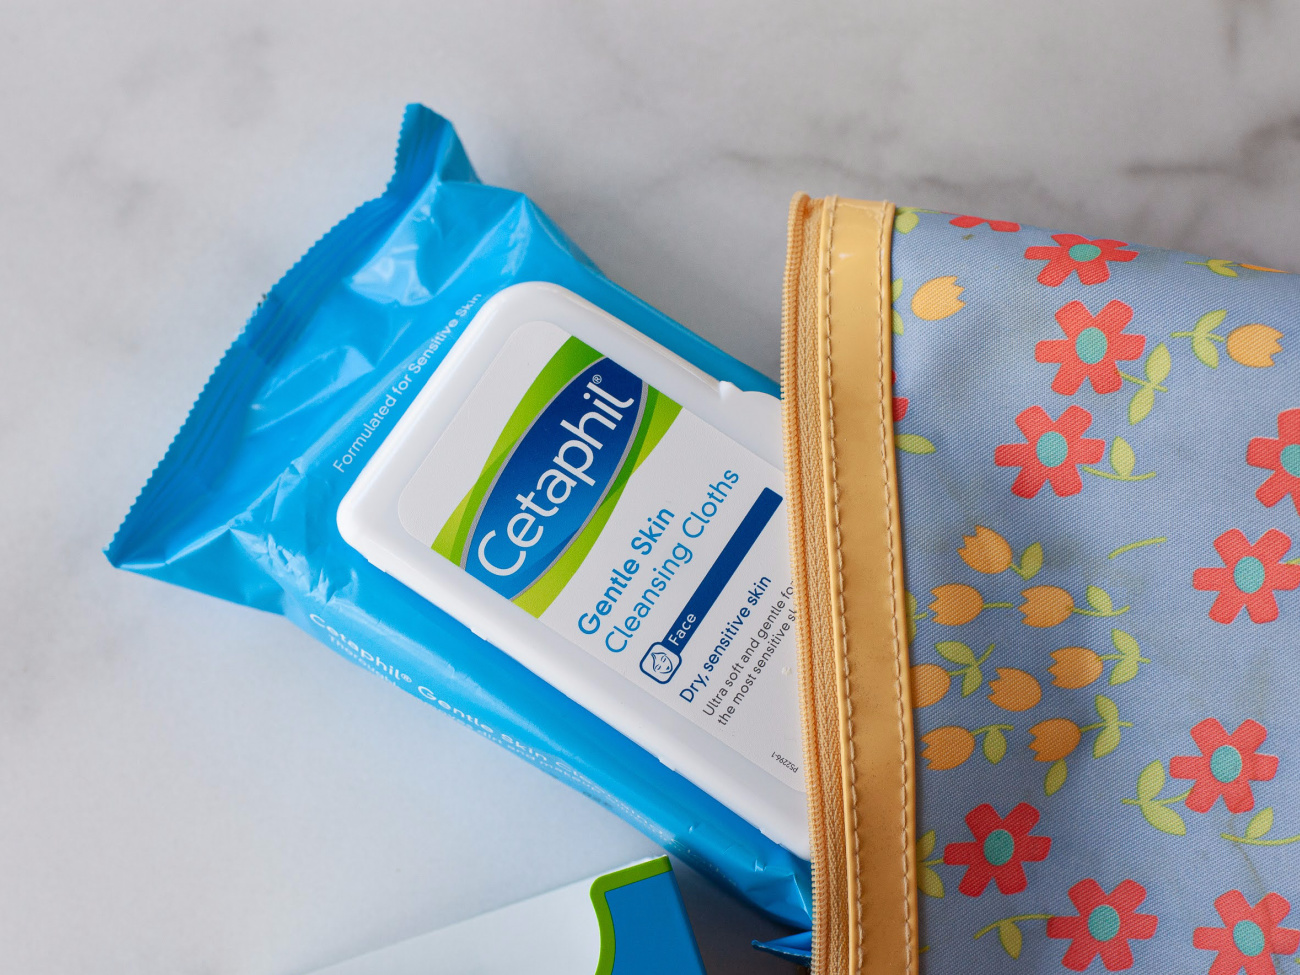 Cetaphil Cleansing Cloths As Low As FREE At Publix